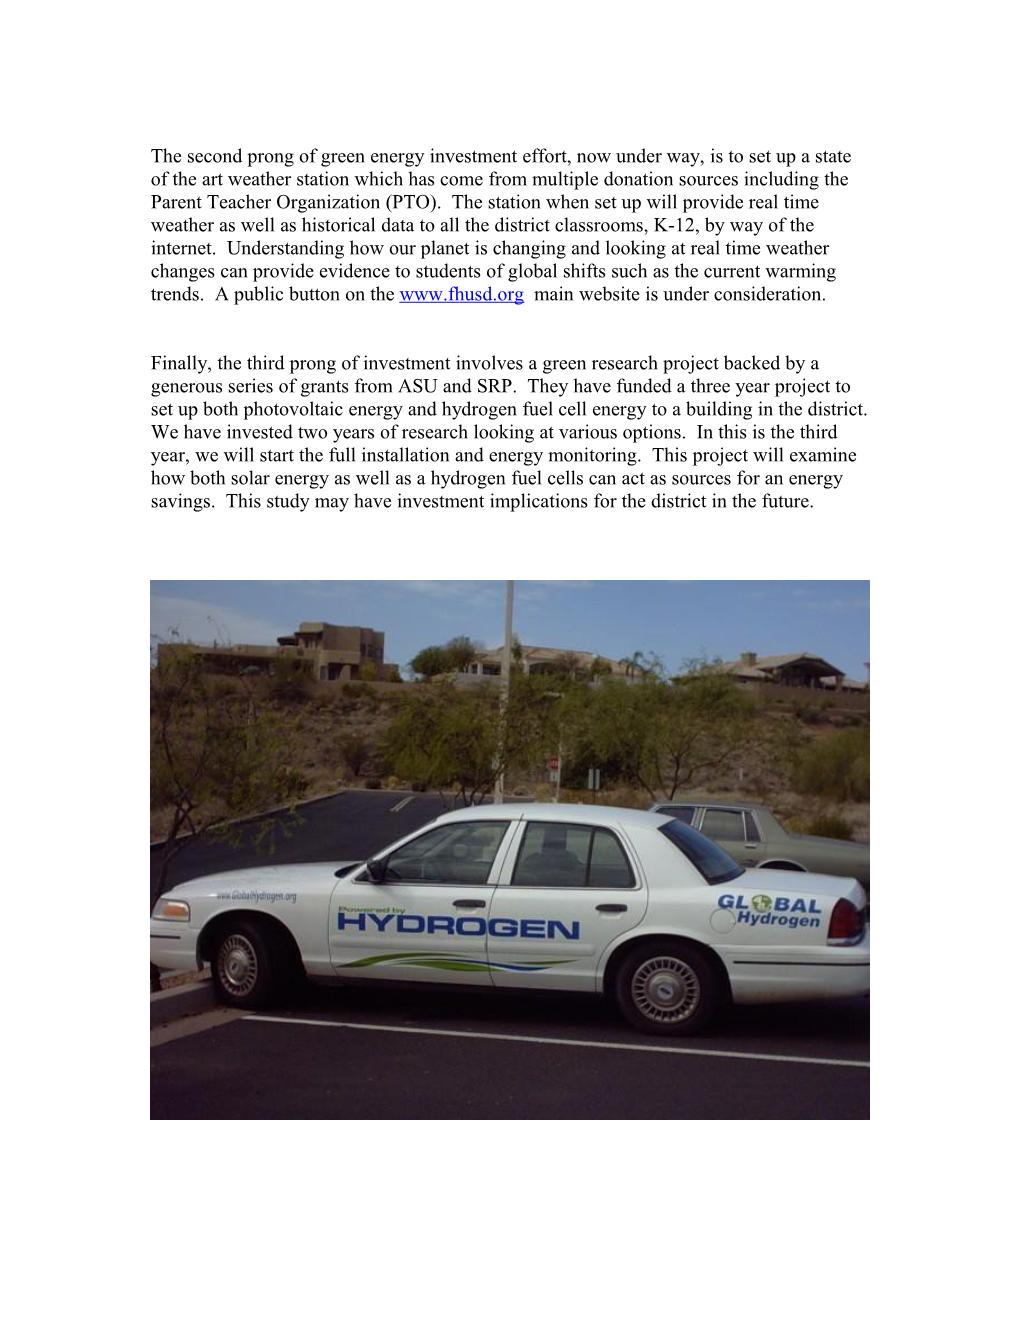 Fountain Hills Purchases a Hydrogen Fuel Research Car